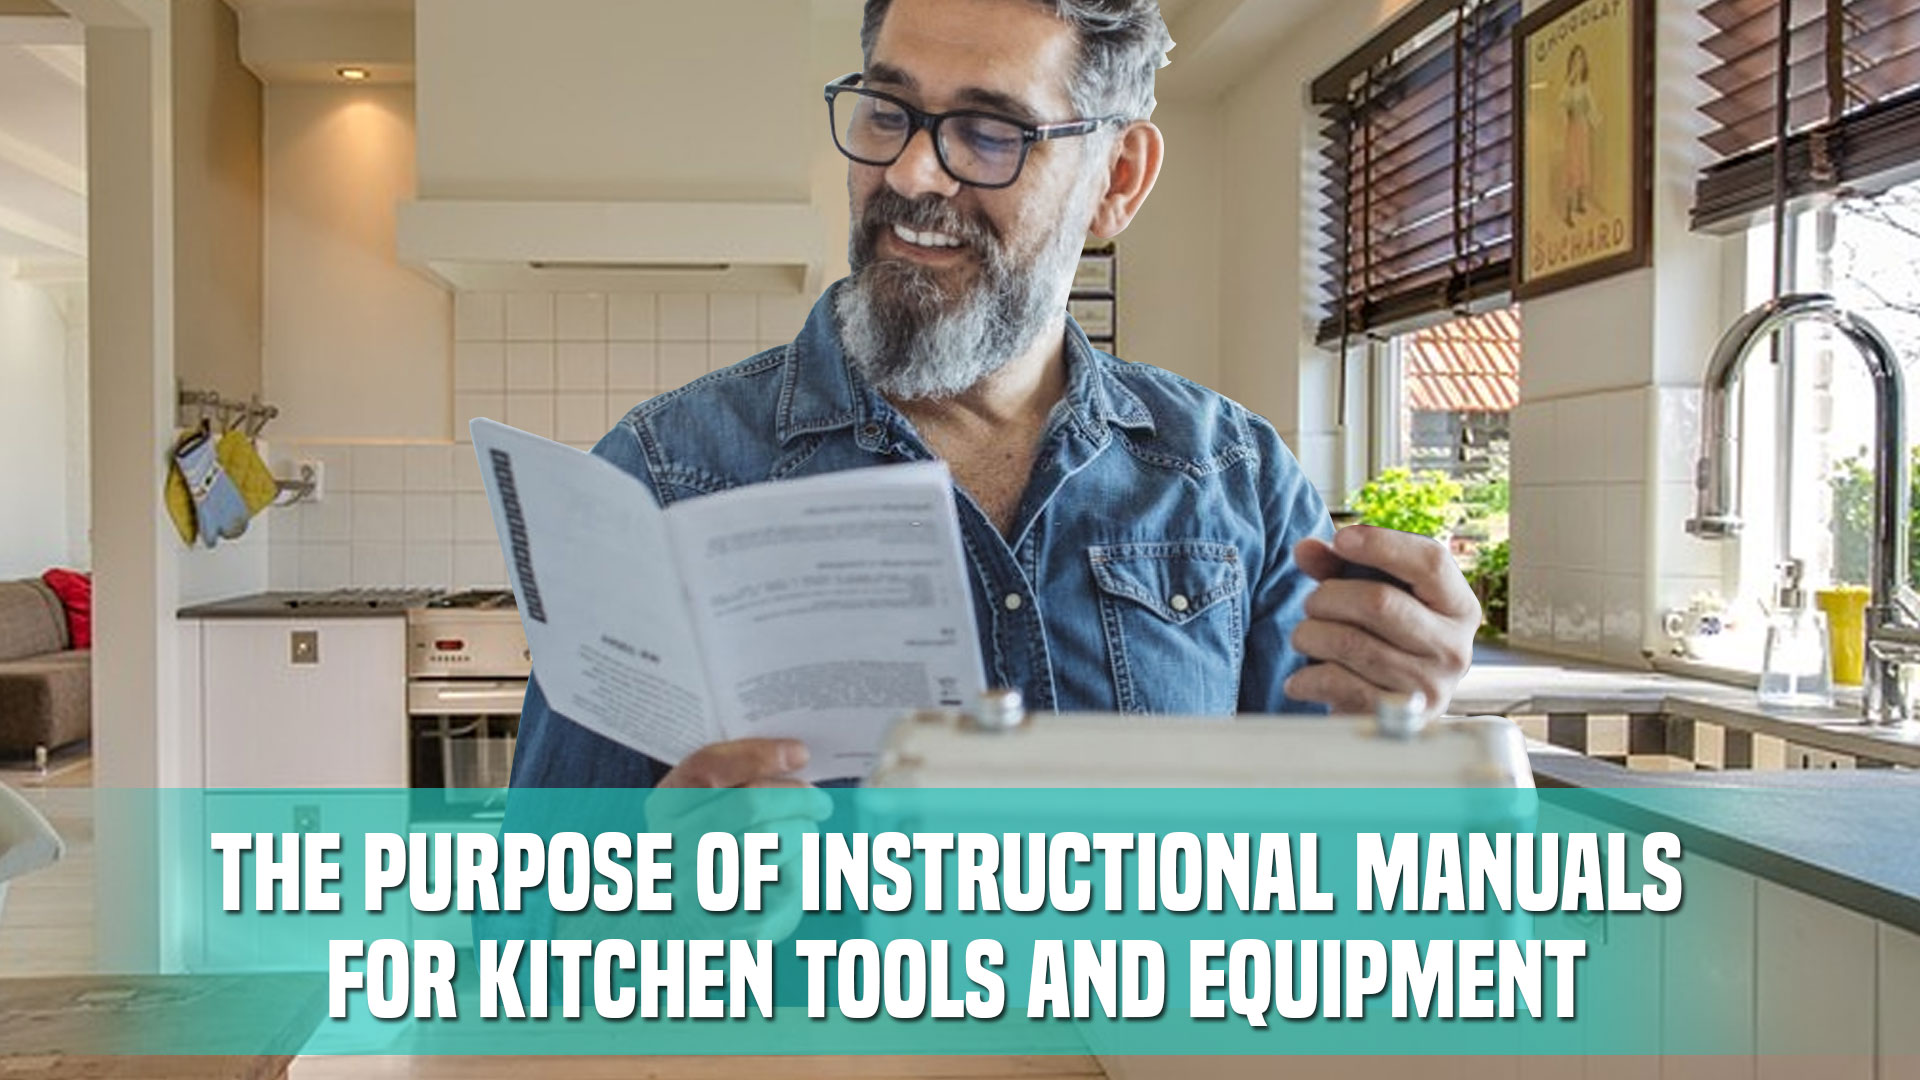 The Purpose of Instructional Manuals for Kitchen Tools and Equipment